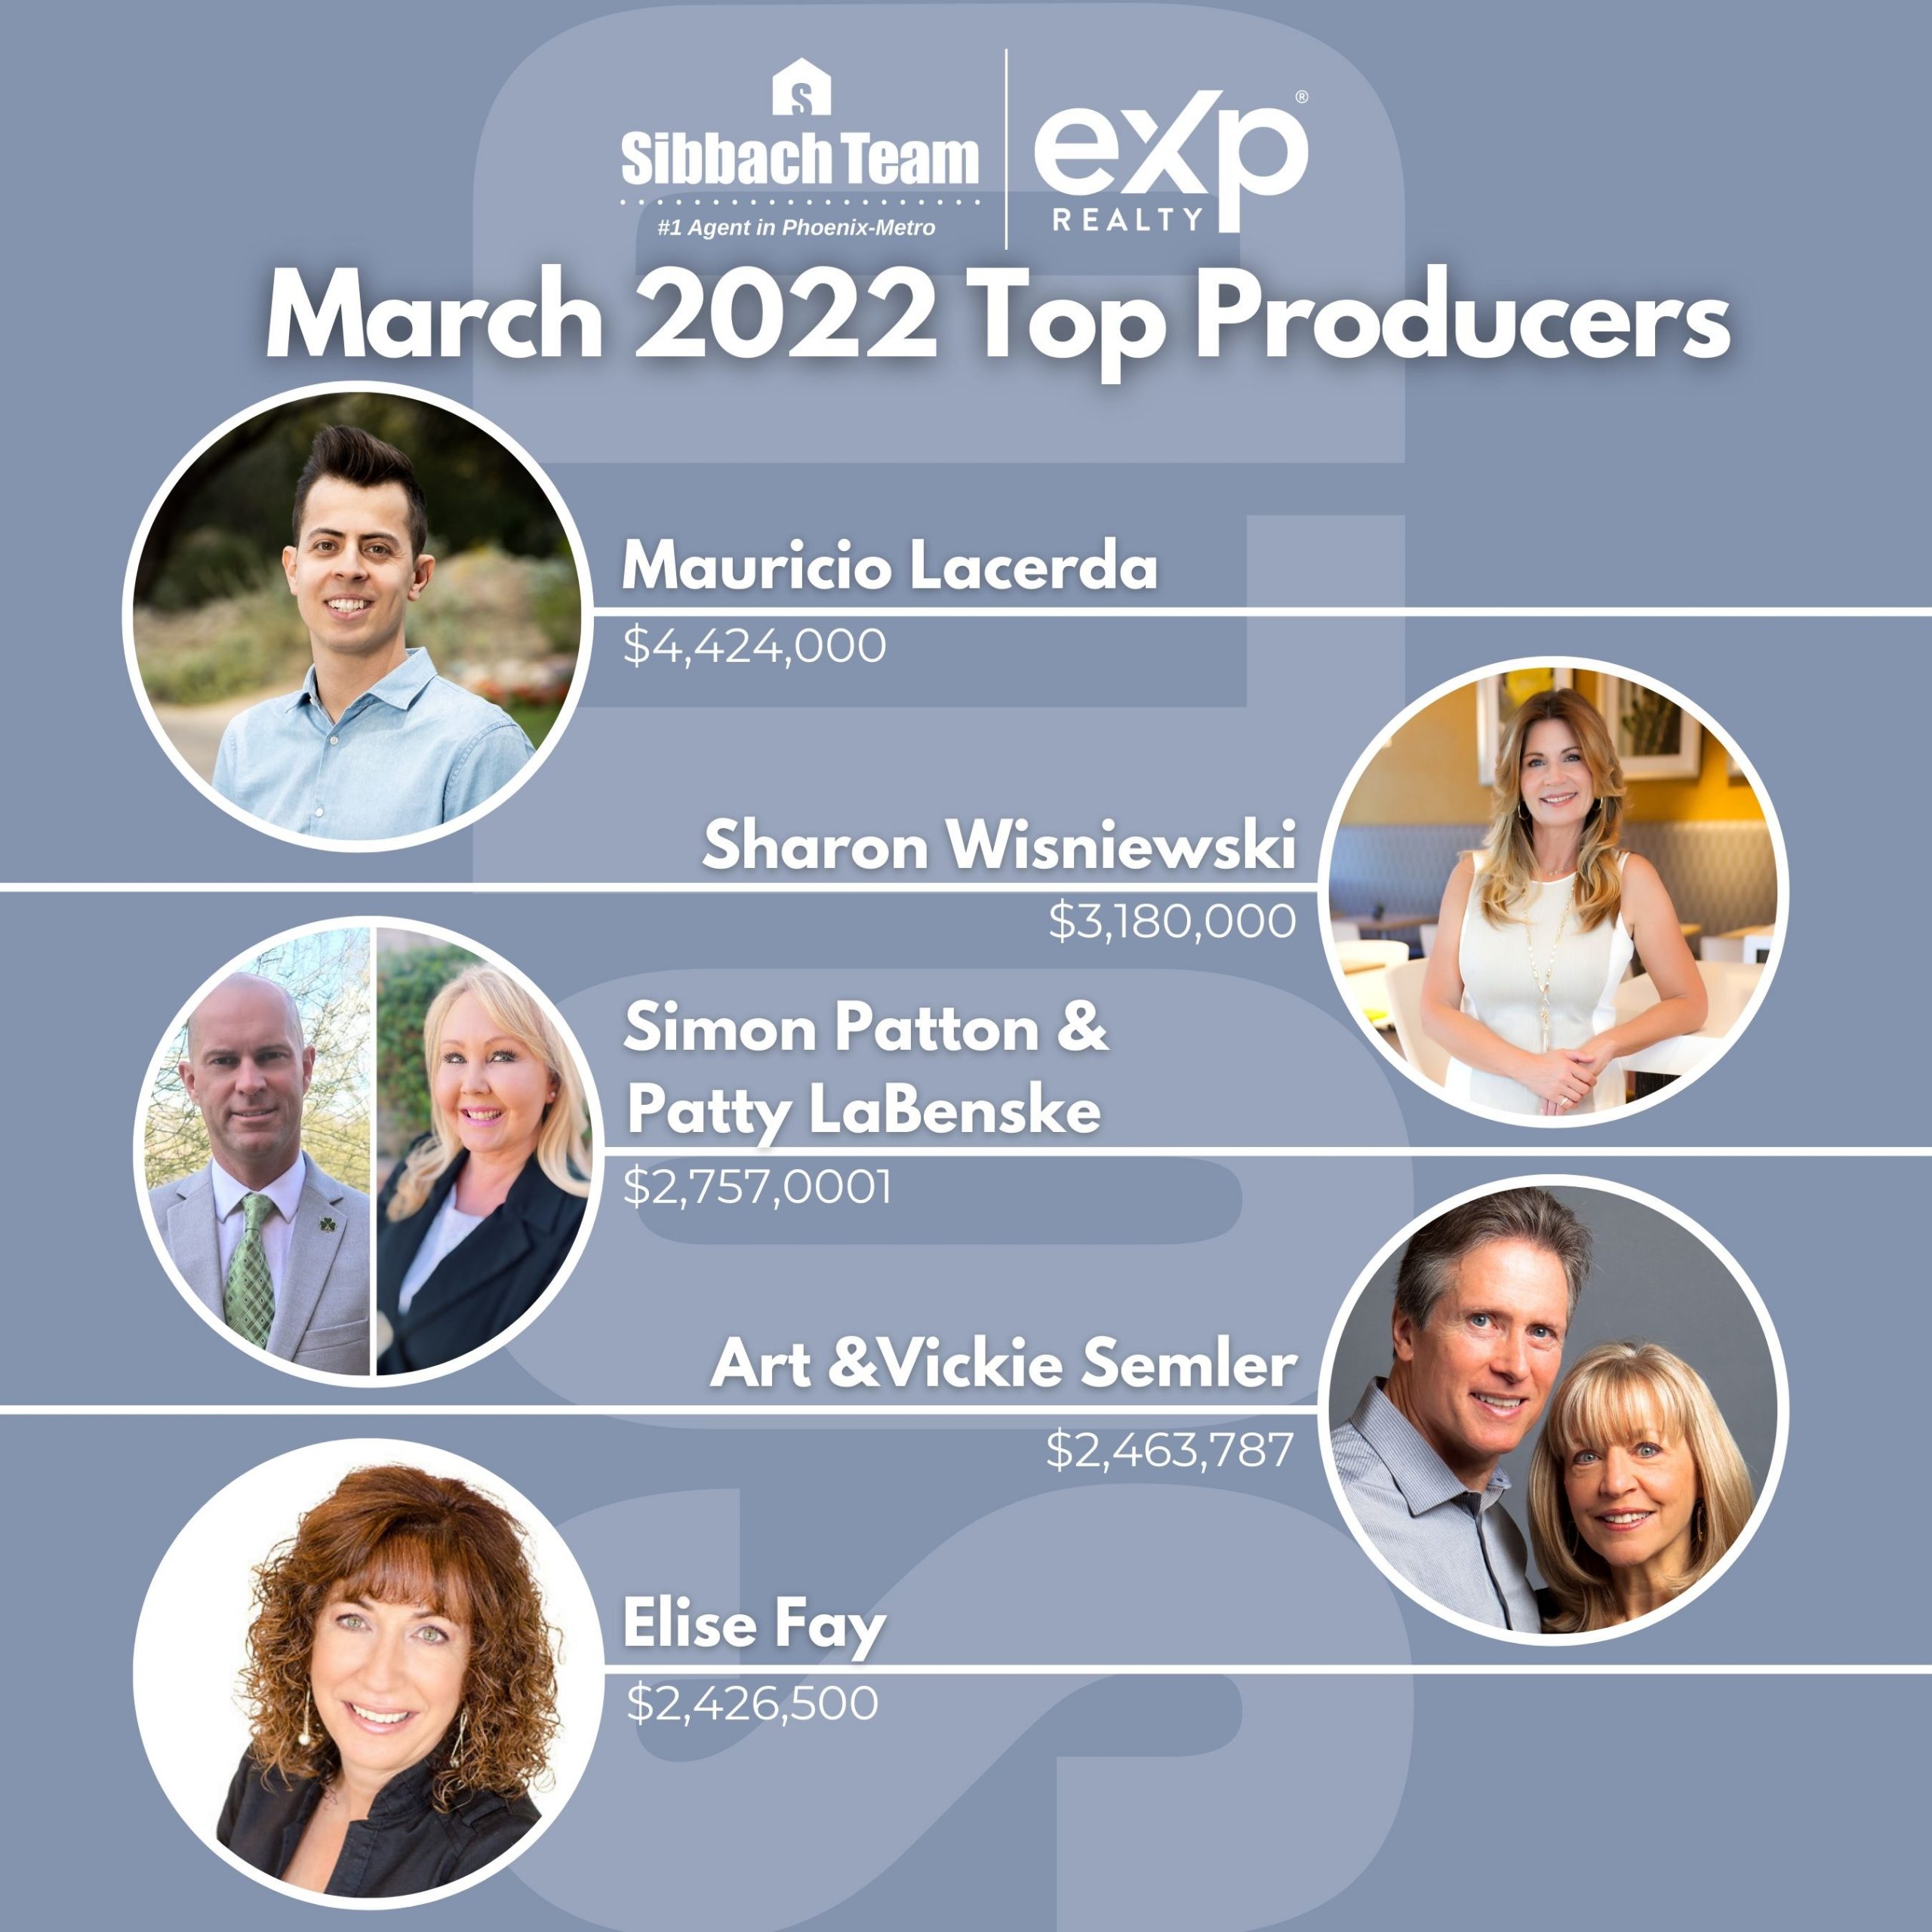 Top Producers March 2022 •